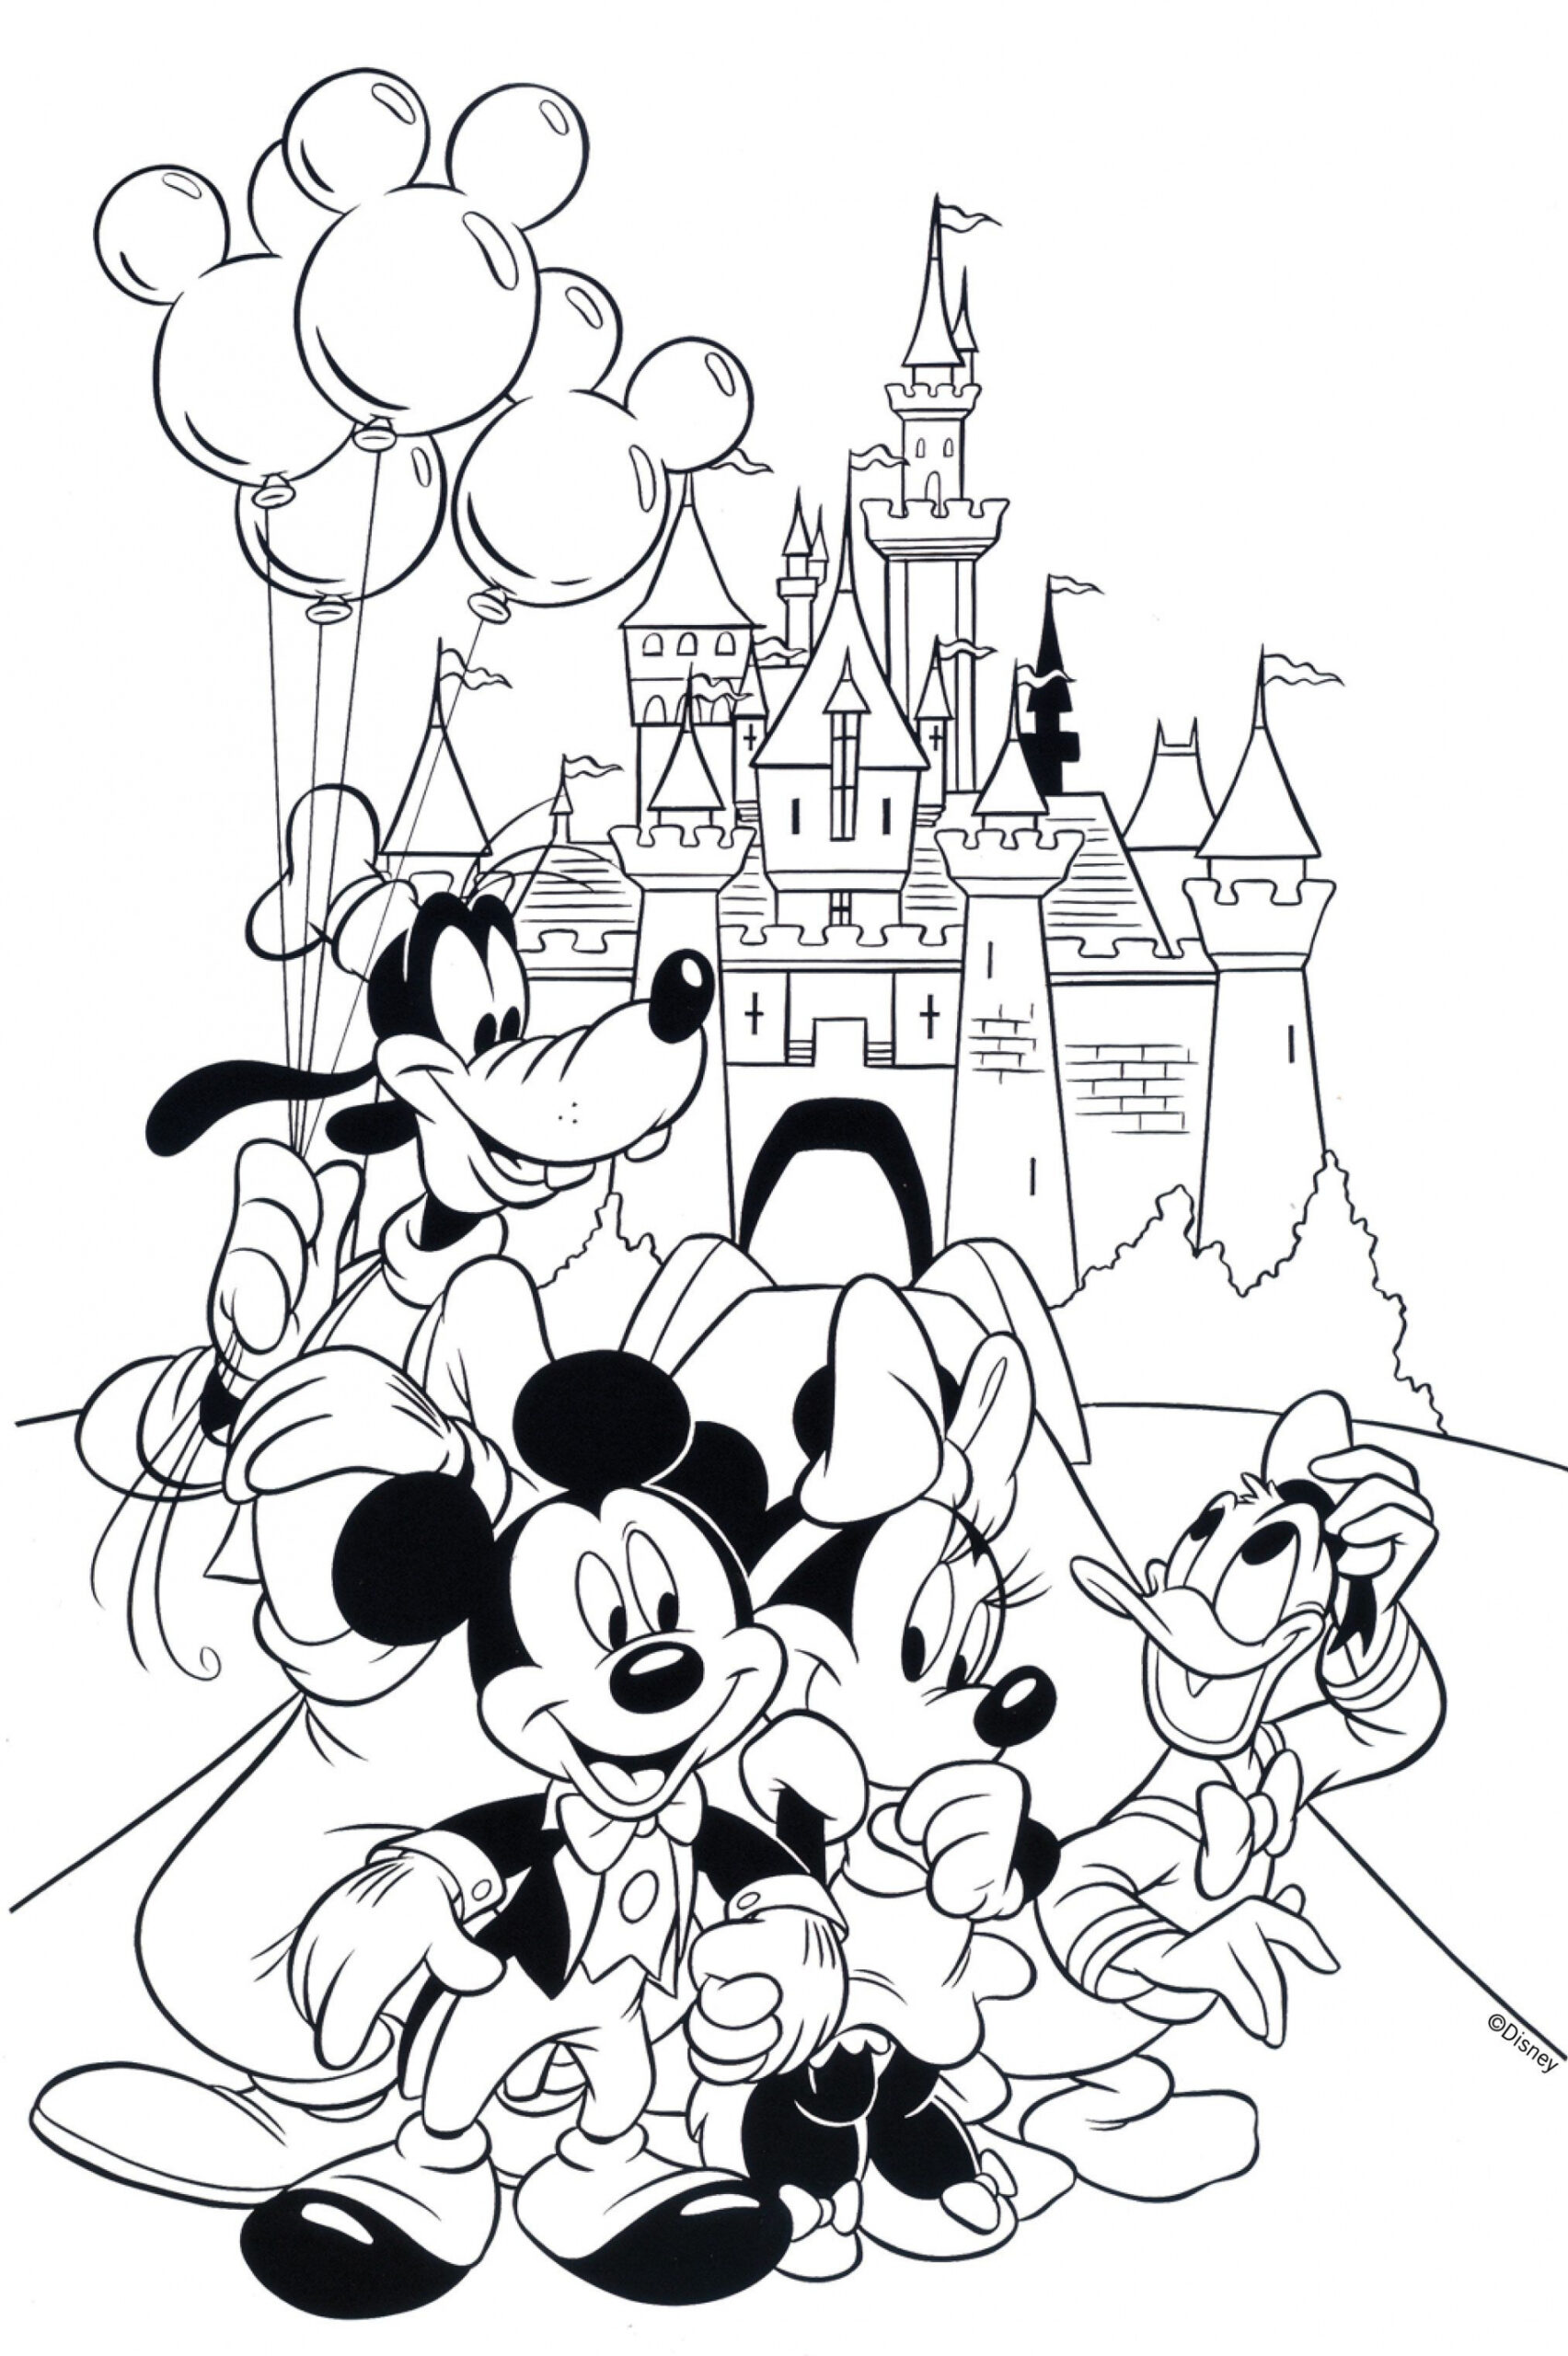 Free Printable Disney Coloring Pages - Printable - Pin on Coloring Pages